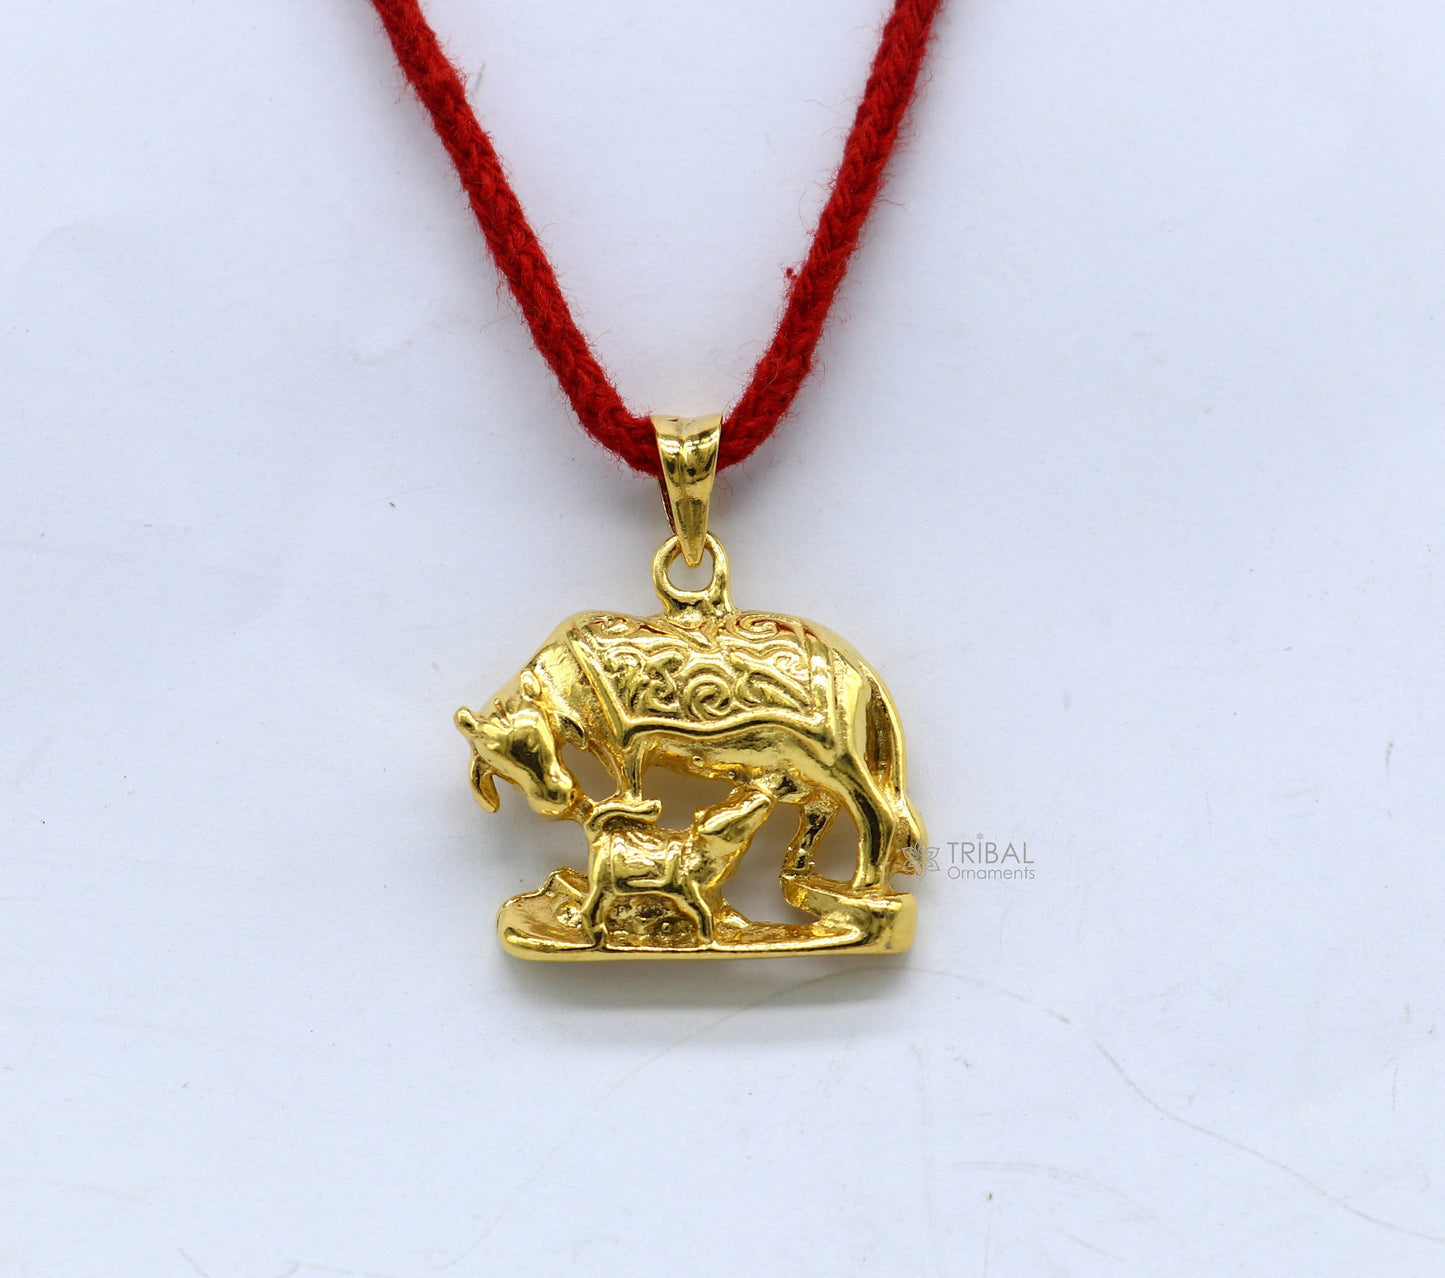 925 sterling silver handmade elegant divine kamdhenu cow with calf pendant, amazing gold polished cow and calf pendant best gift nsp605 - TRIBAL ORNAMENTS